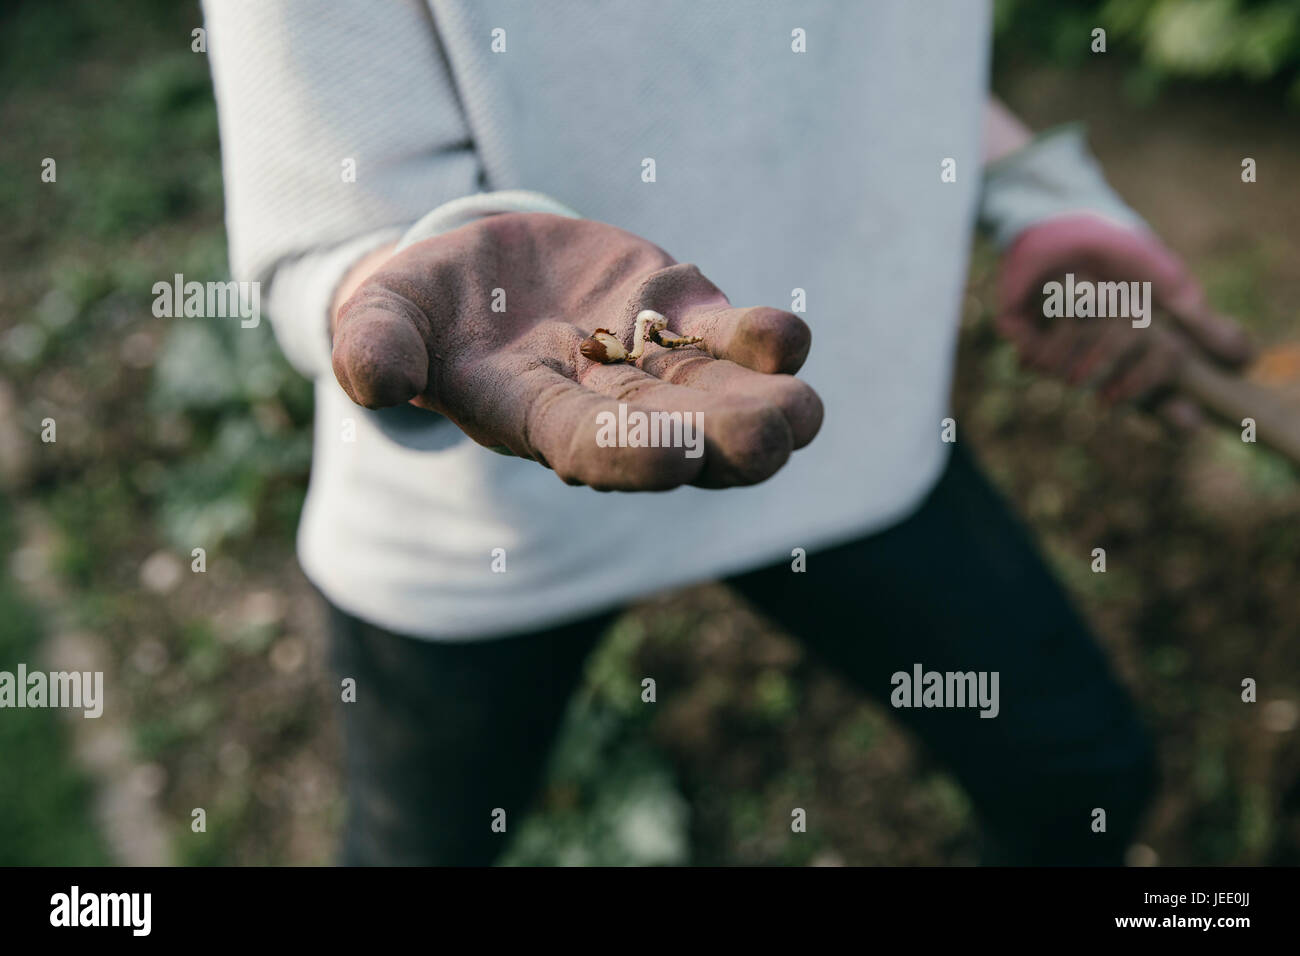 Hand of gardening woman holding a germ bud, close-up Stock Photo